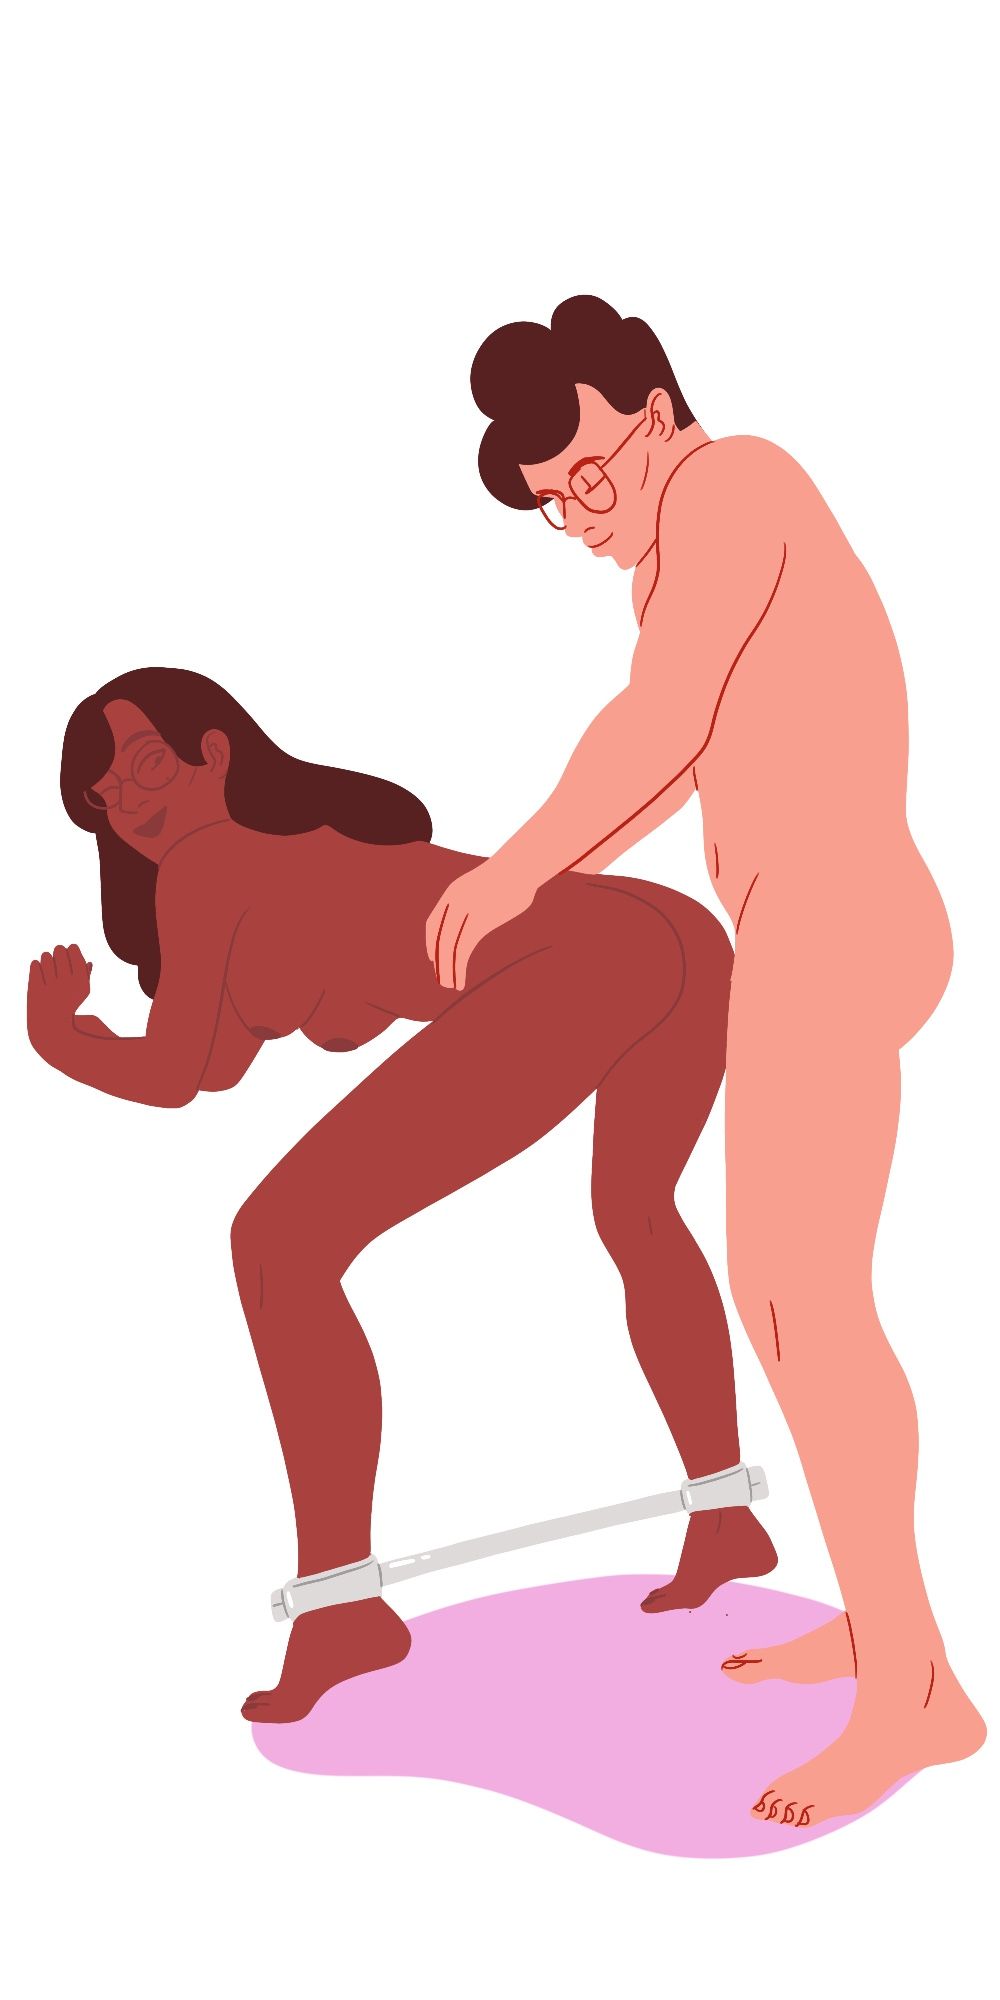 11 Submissive Sex Positions photo